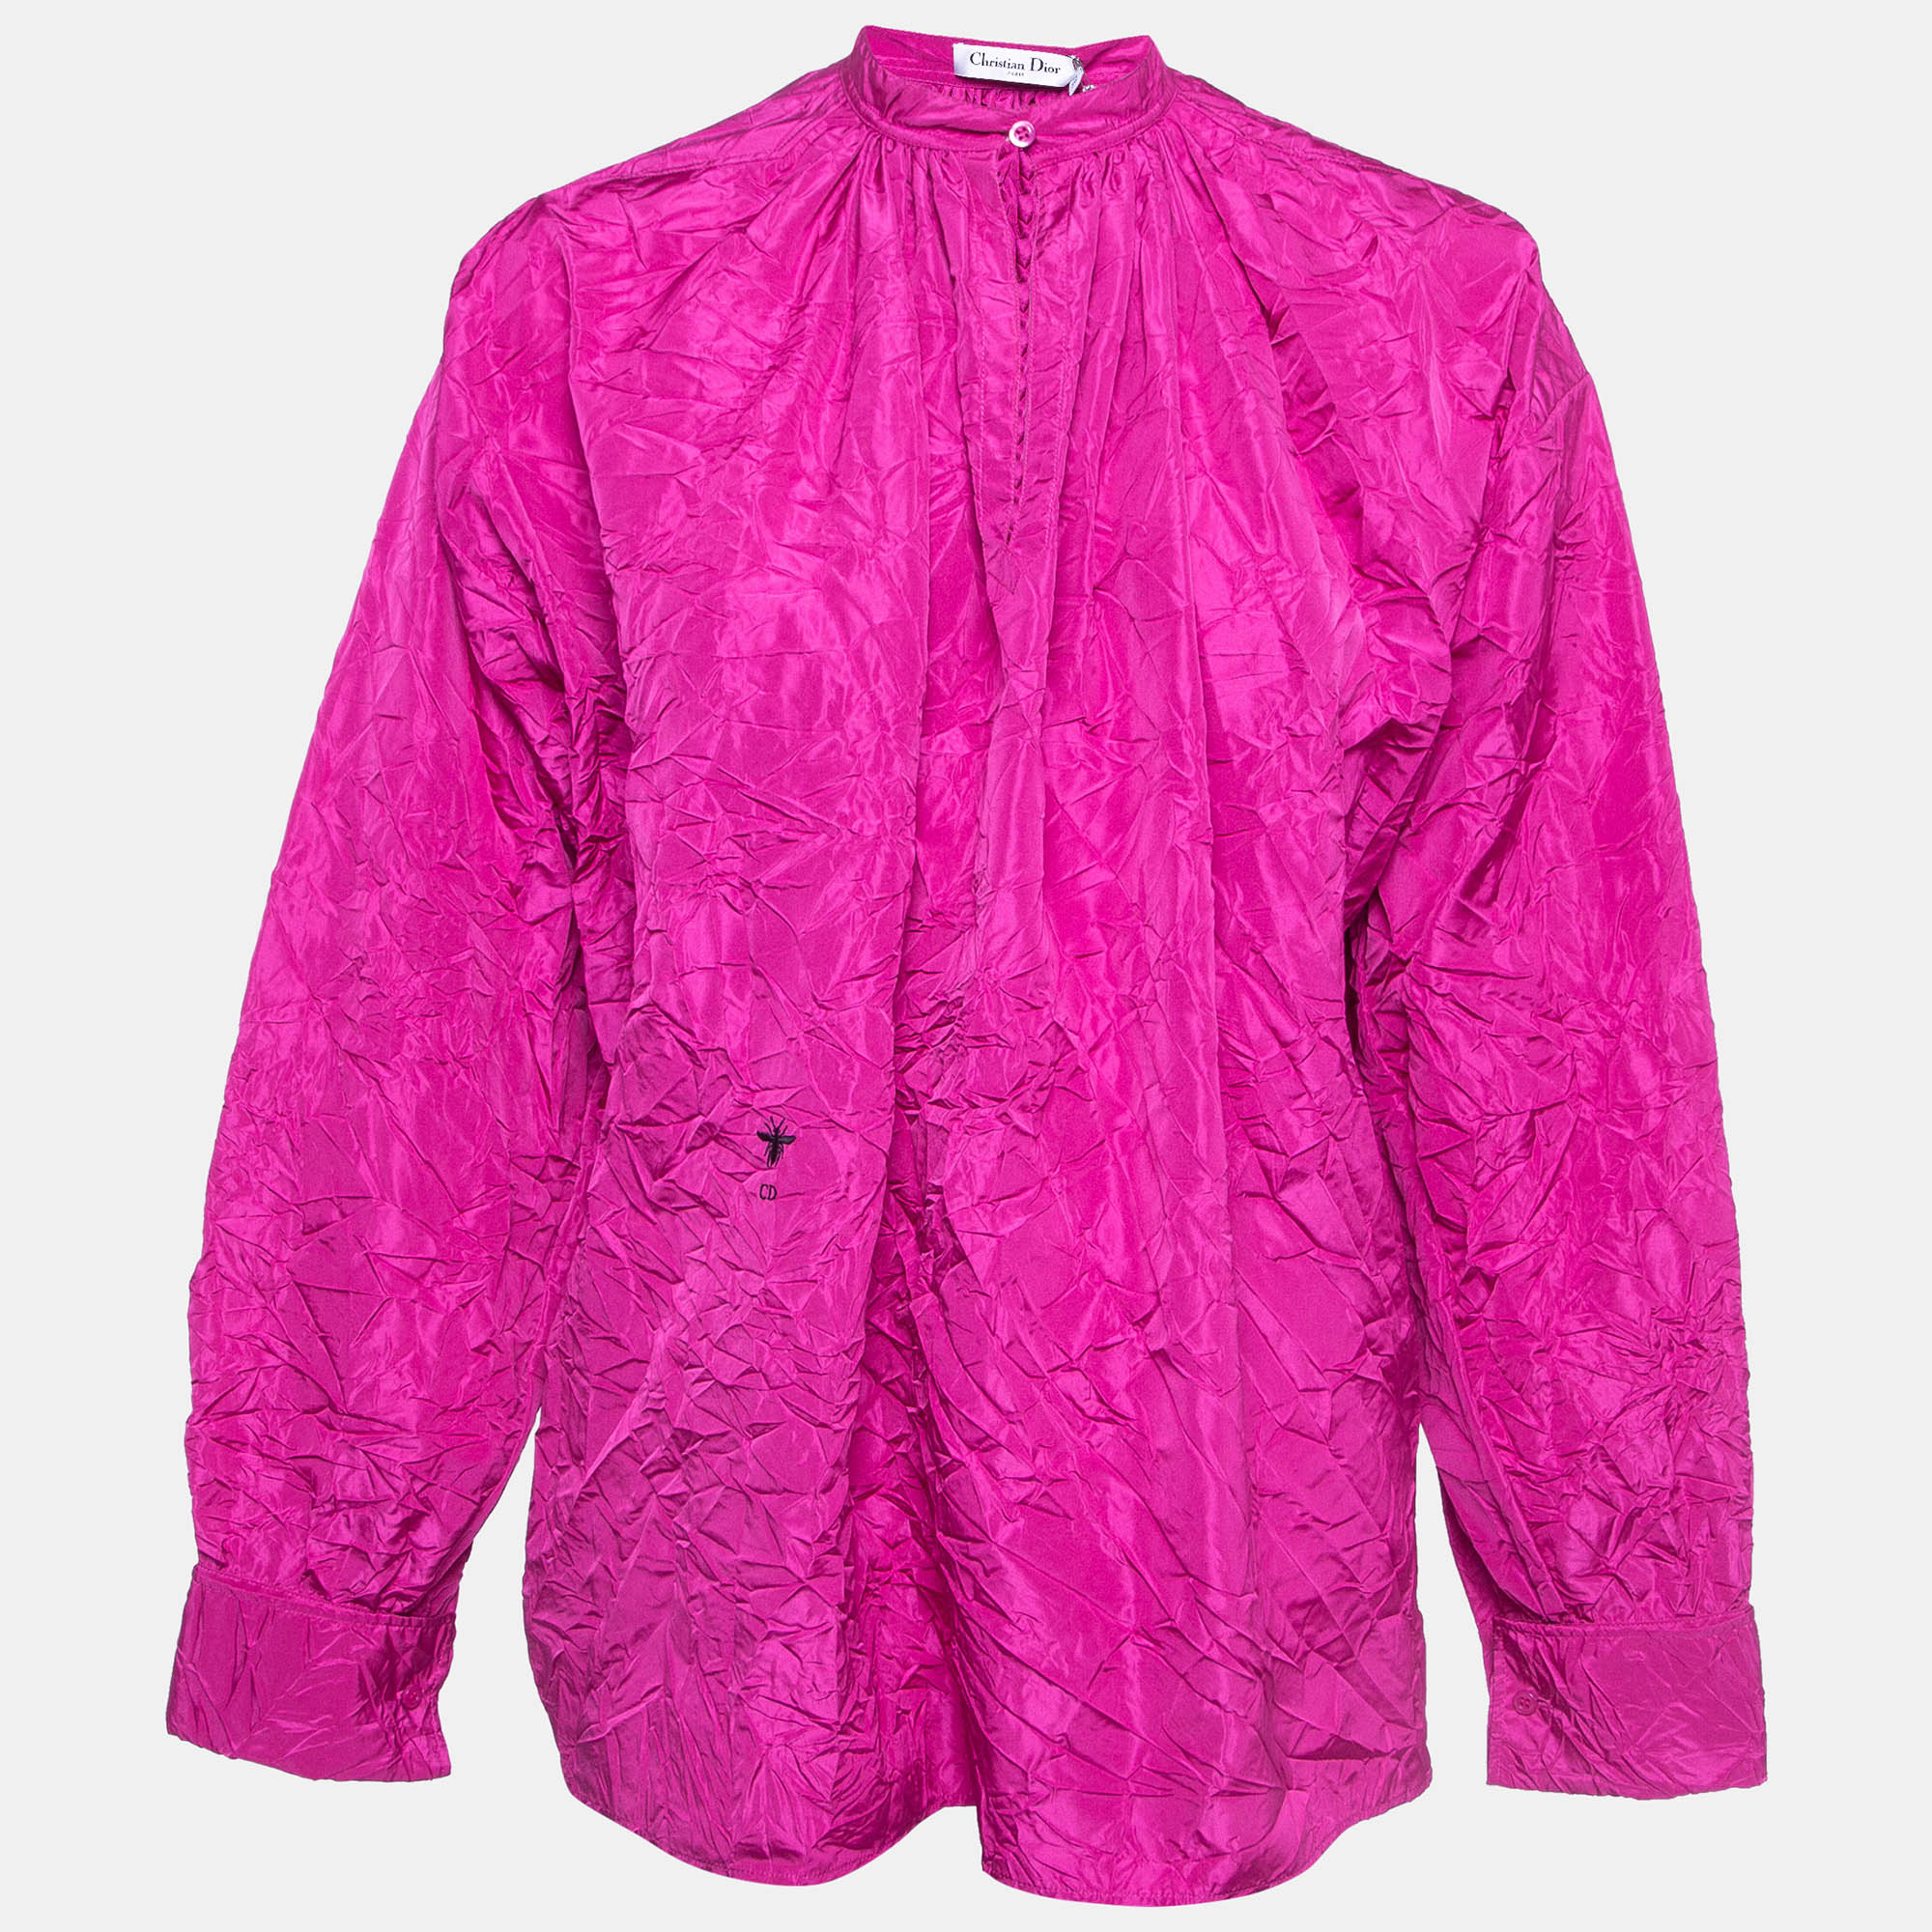 Dior pink crinkle taffeta high-low oversized blouse m